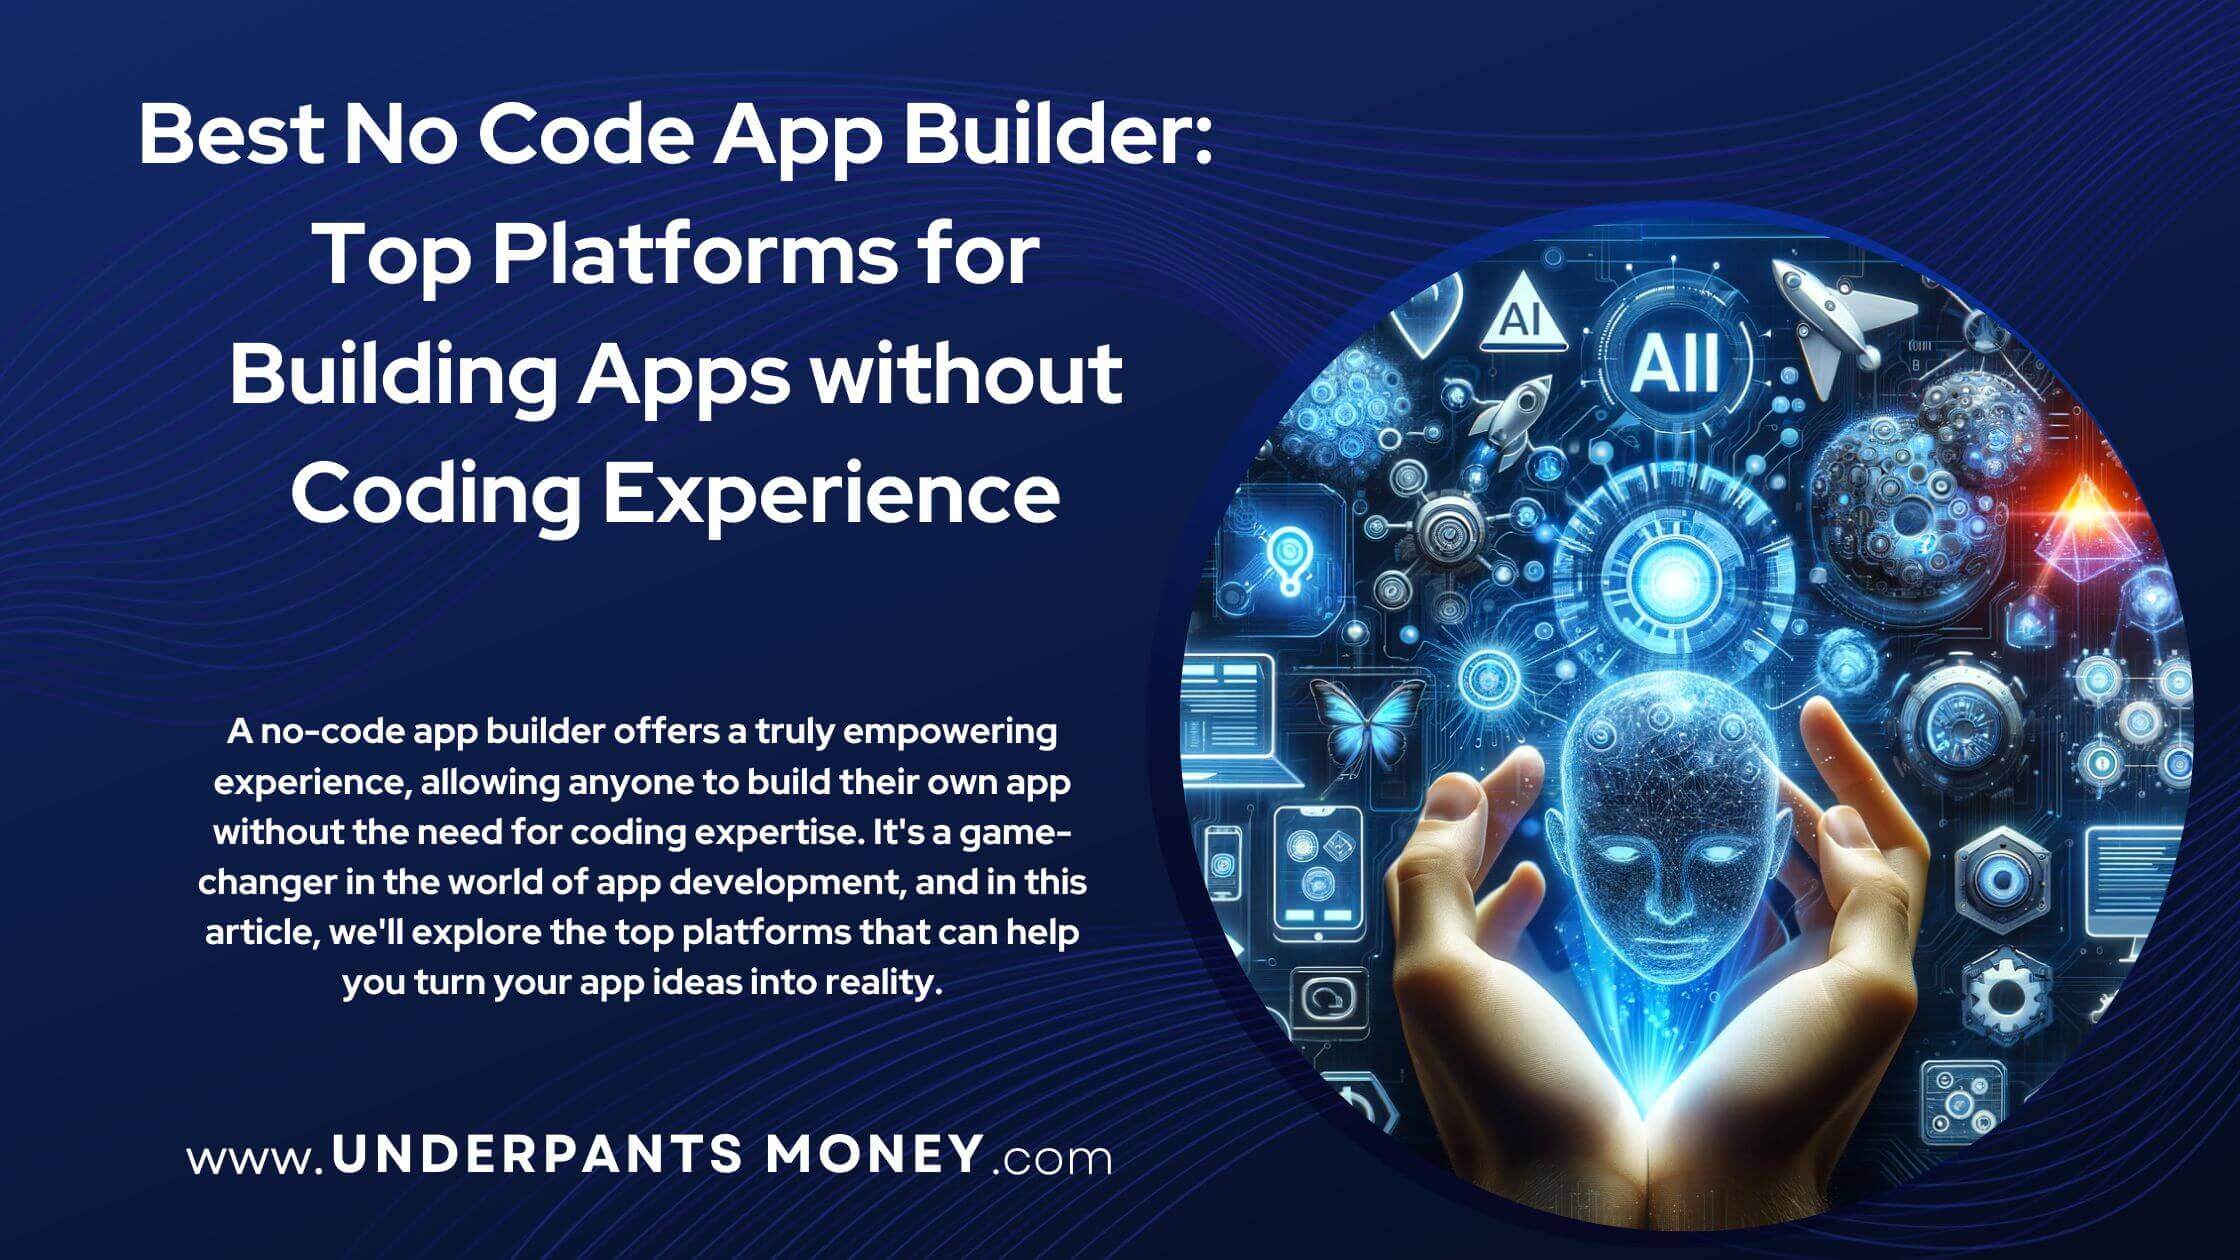 best no cold app builder title and sub text with website on blue. to the right is an image of hands holding a holographic head and apps floating around it